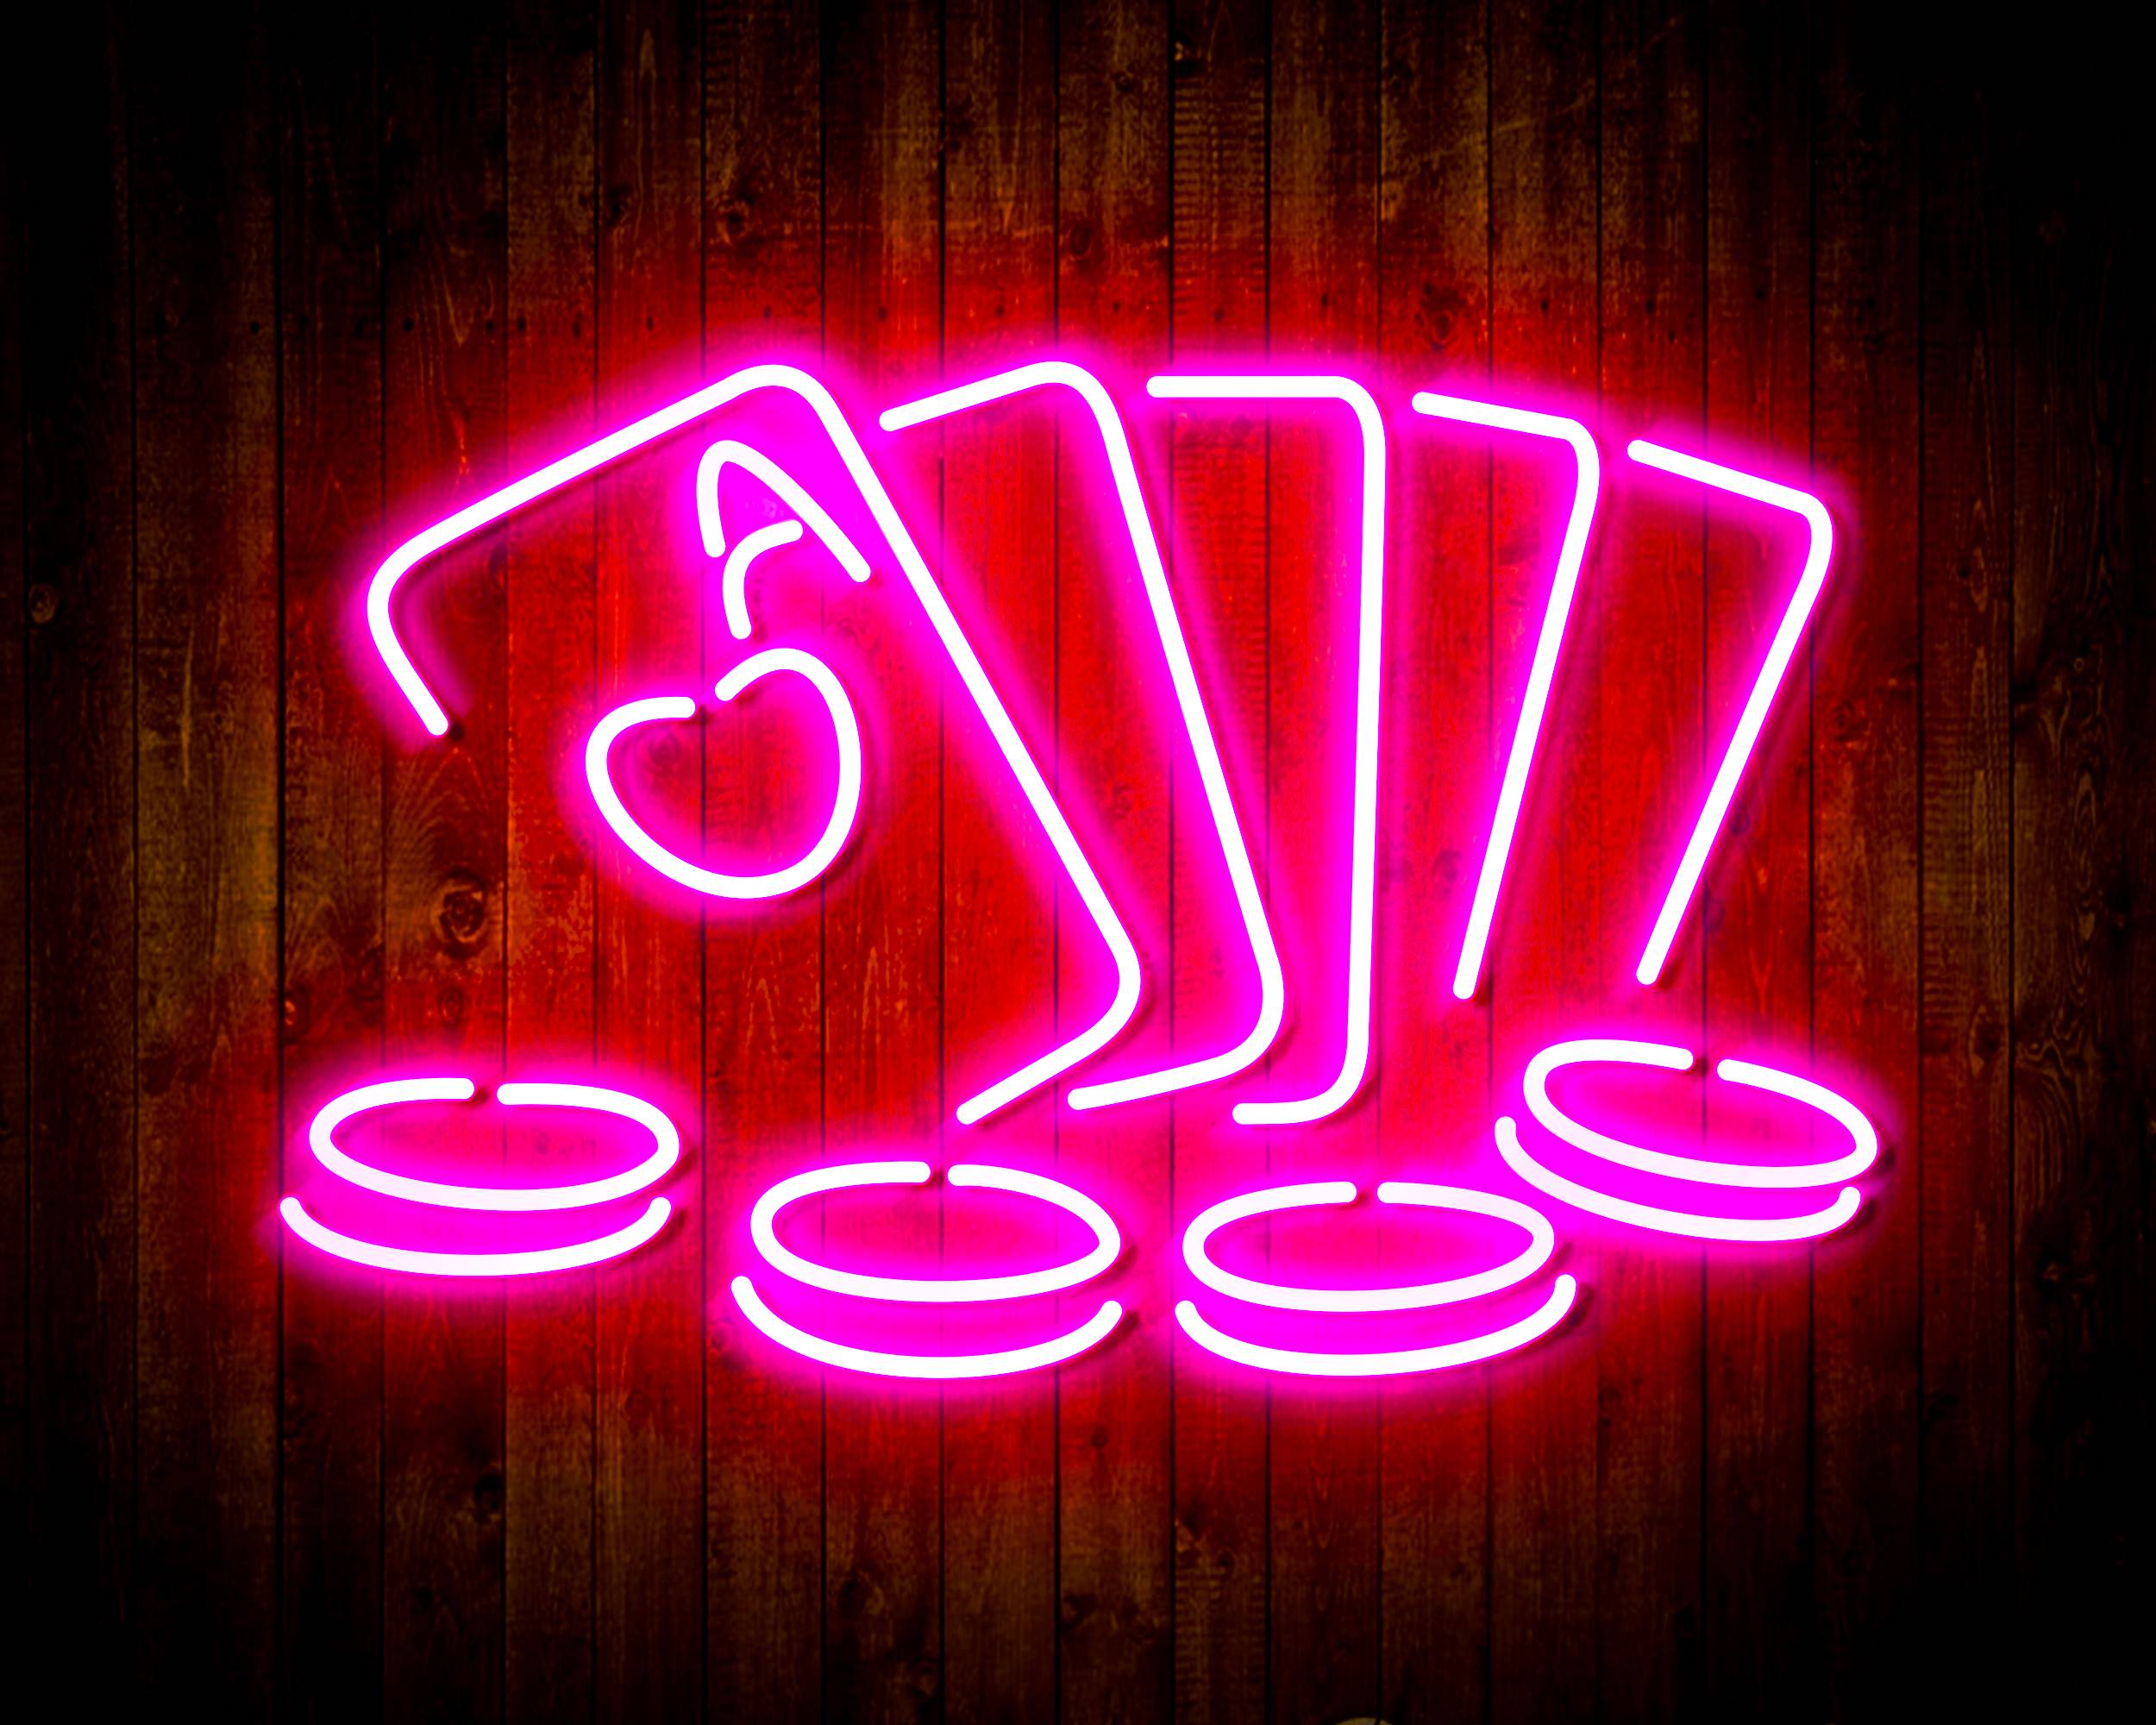 Cards with Coins for Crown Royal Handmade LED Neon Light Sign